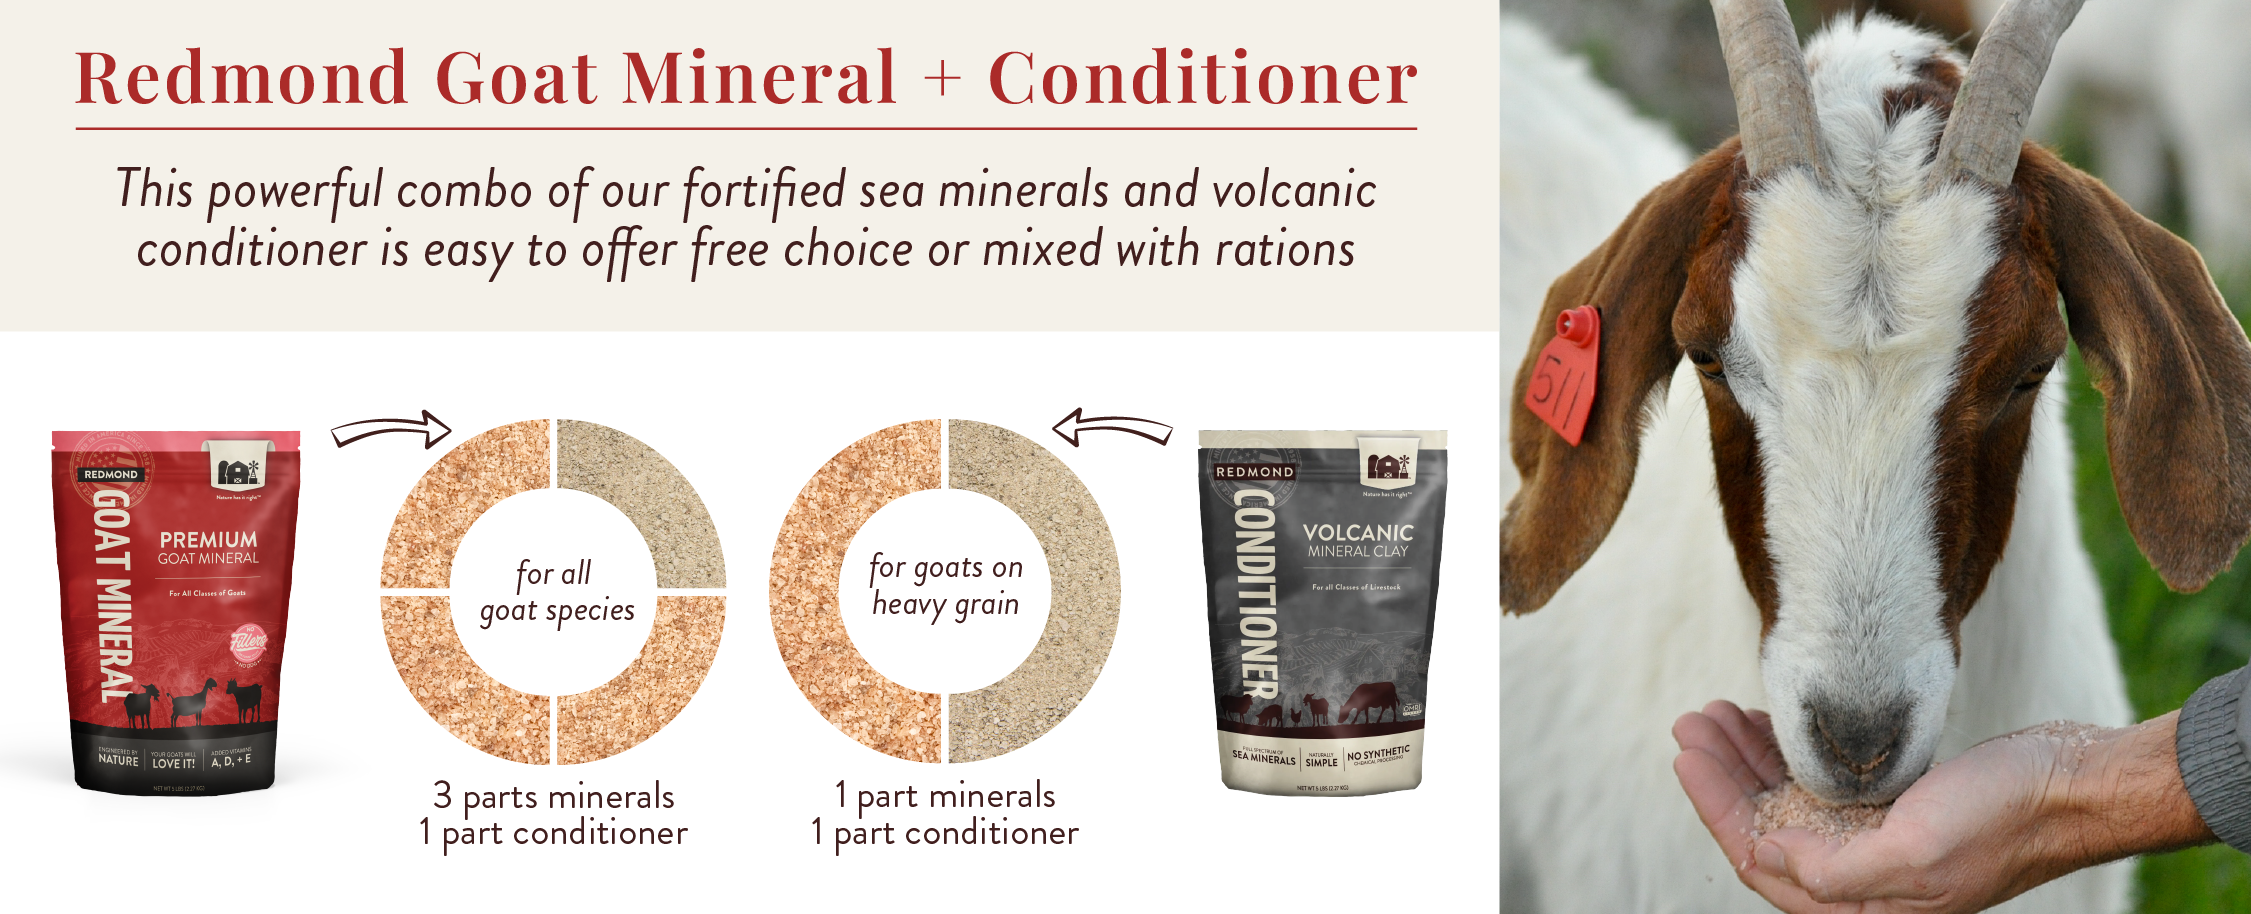 Redmond goat mineral and conditioner